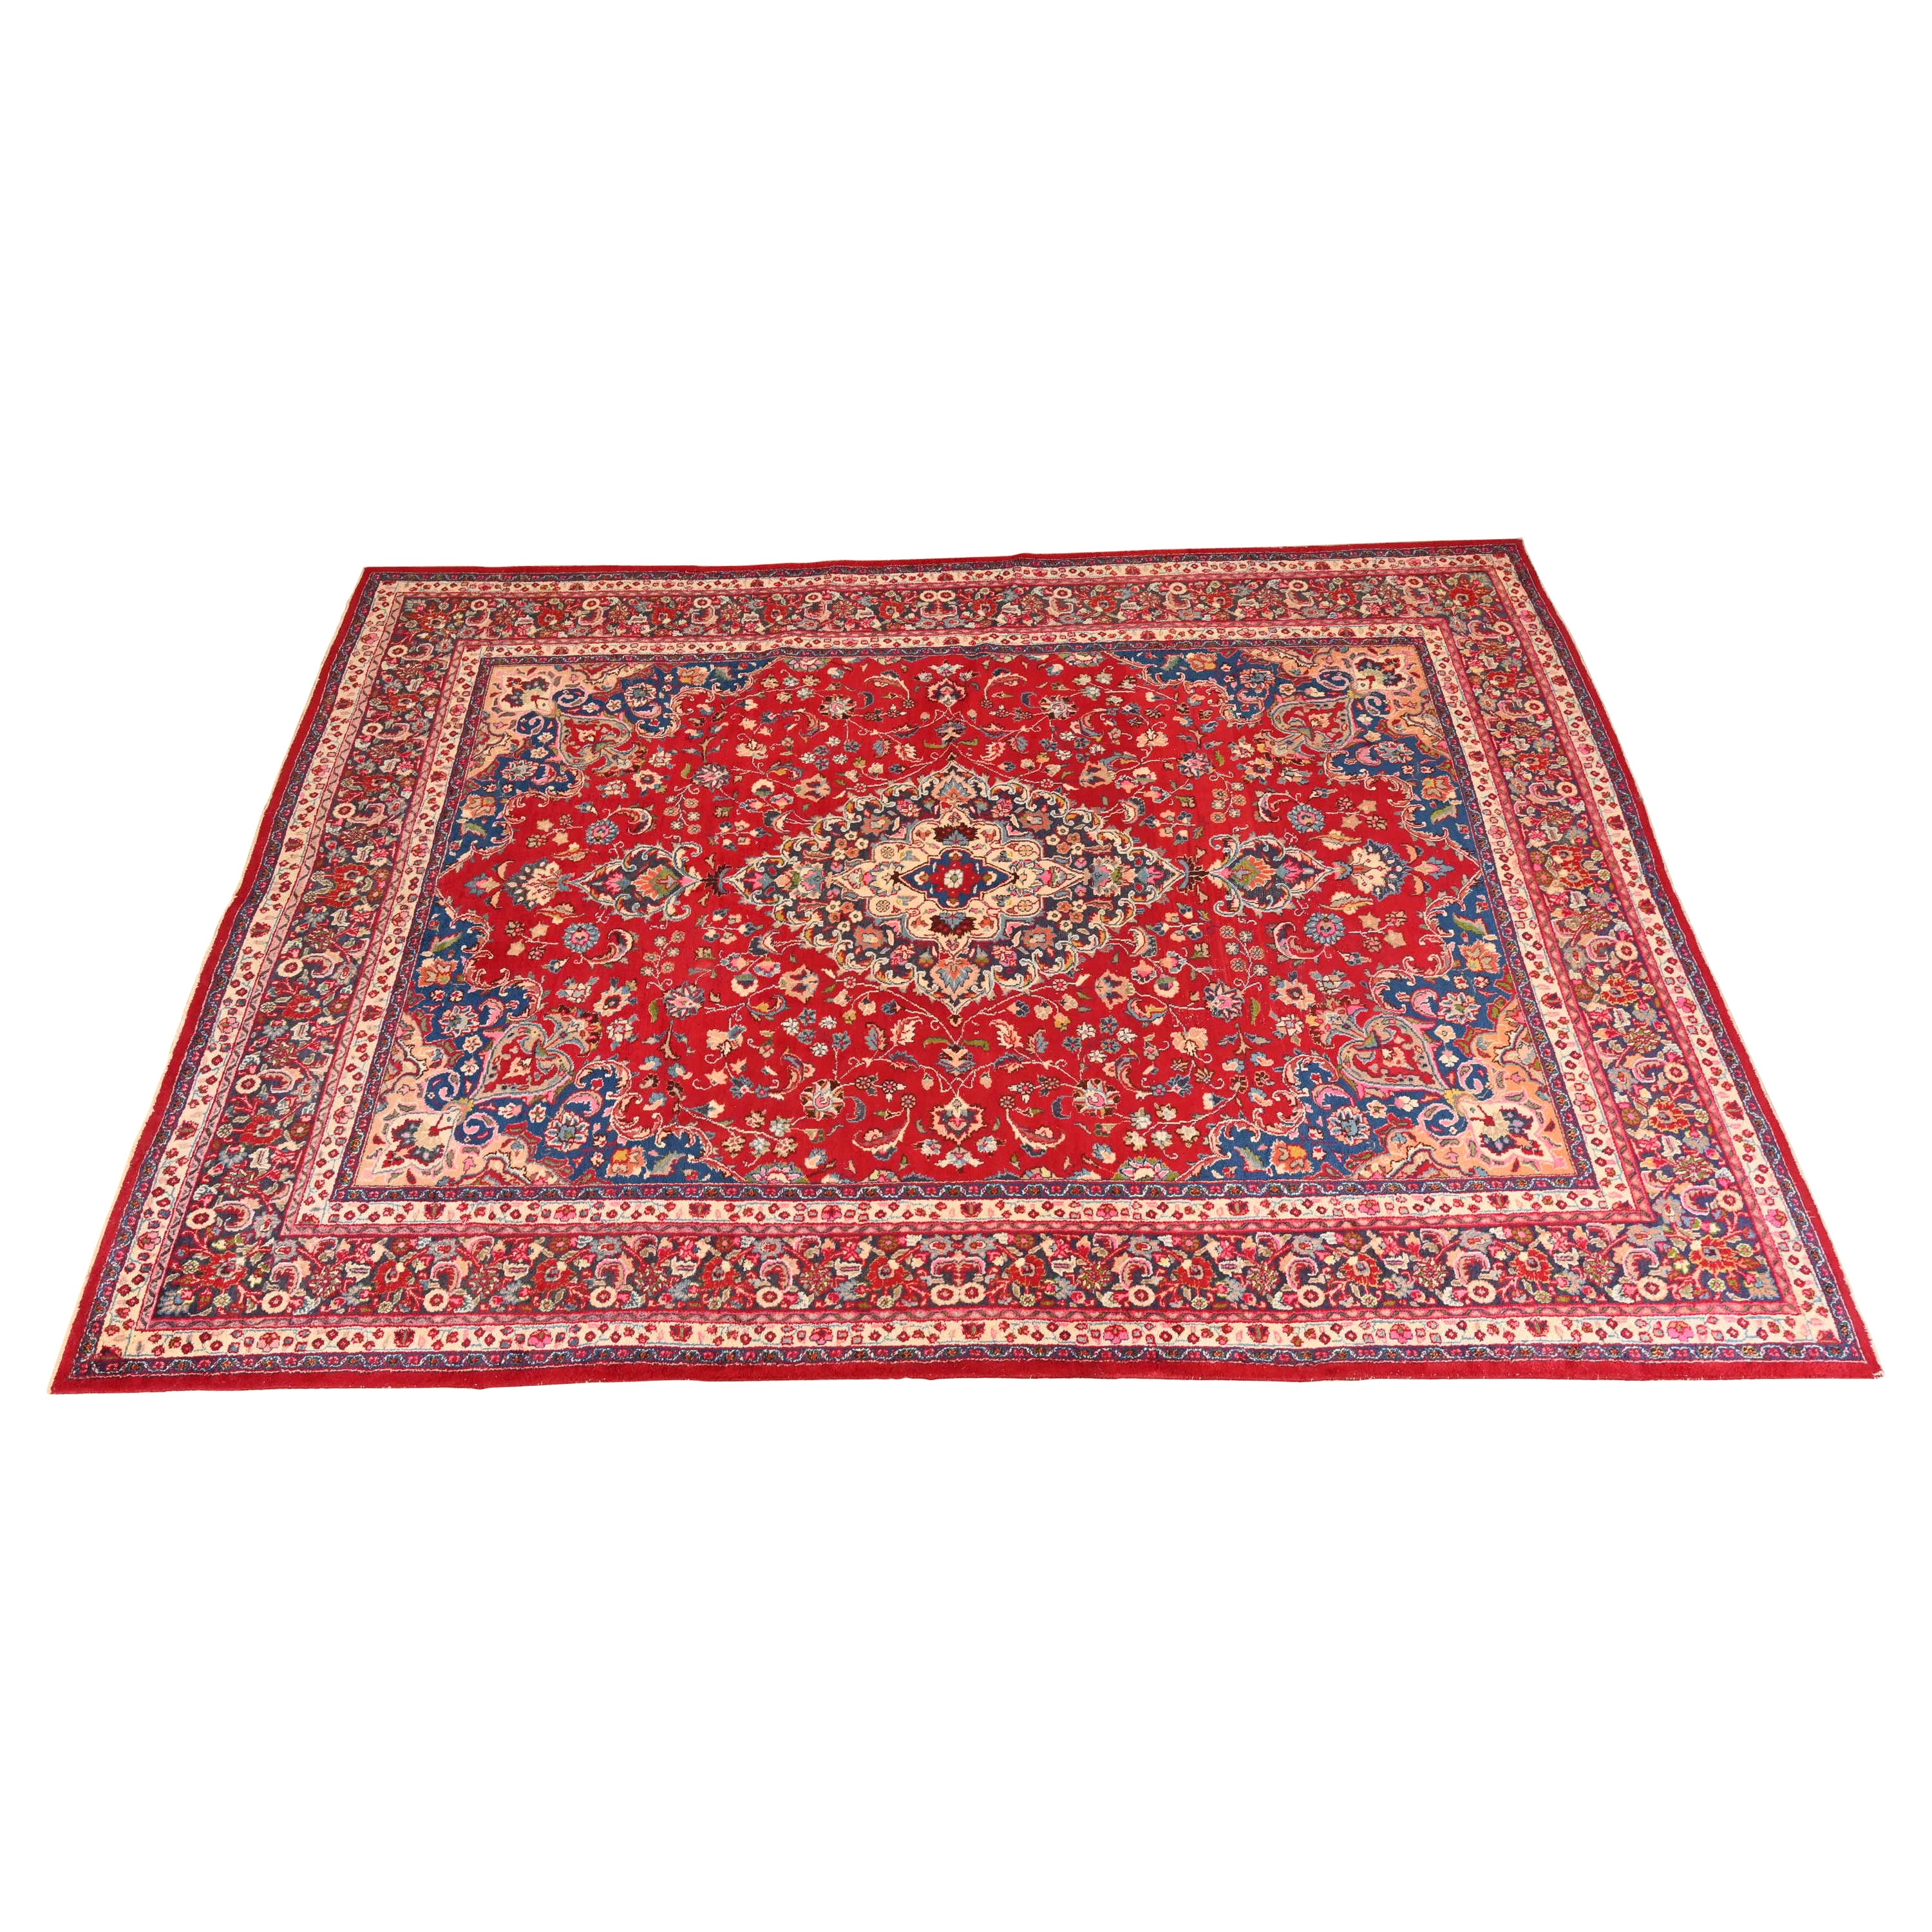 intage Hand-Knotted Persian Tabriz Room Size Wool Area Rug For Sale